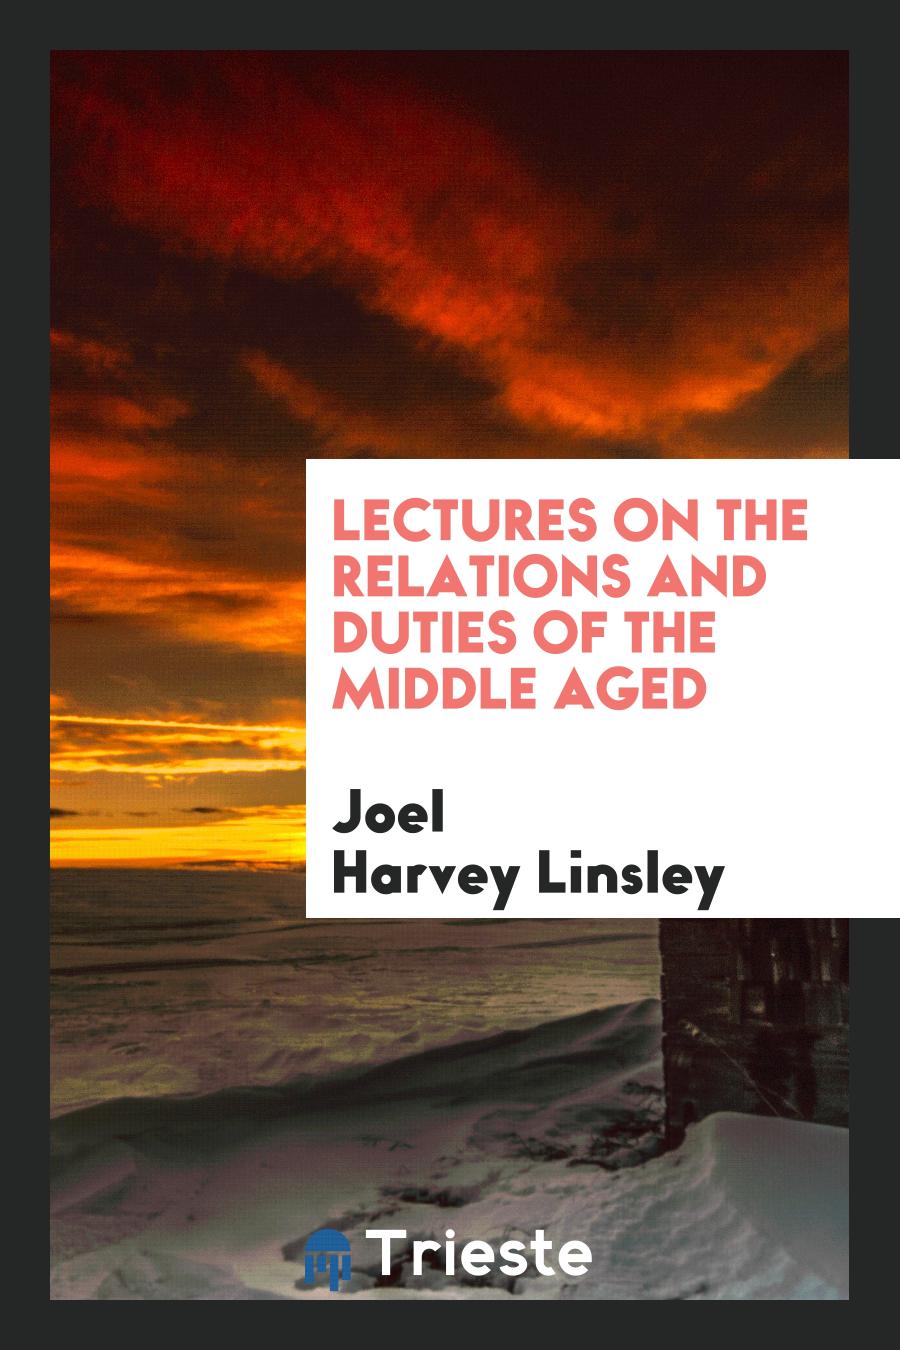 Lectures on the Relations and Duties of the Middle Aged